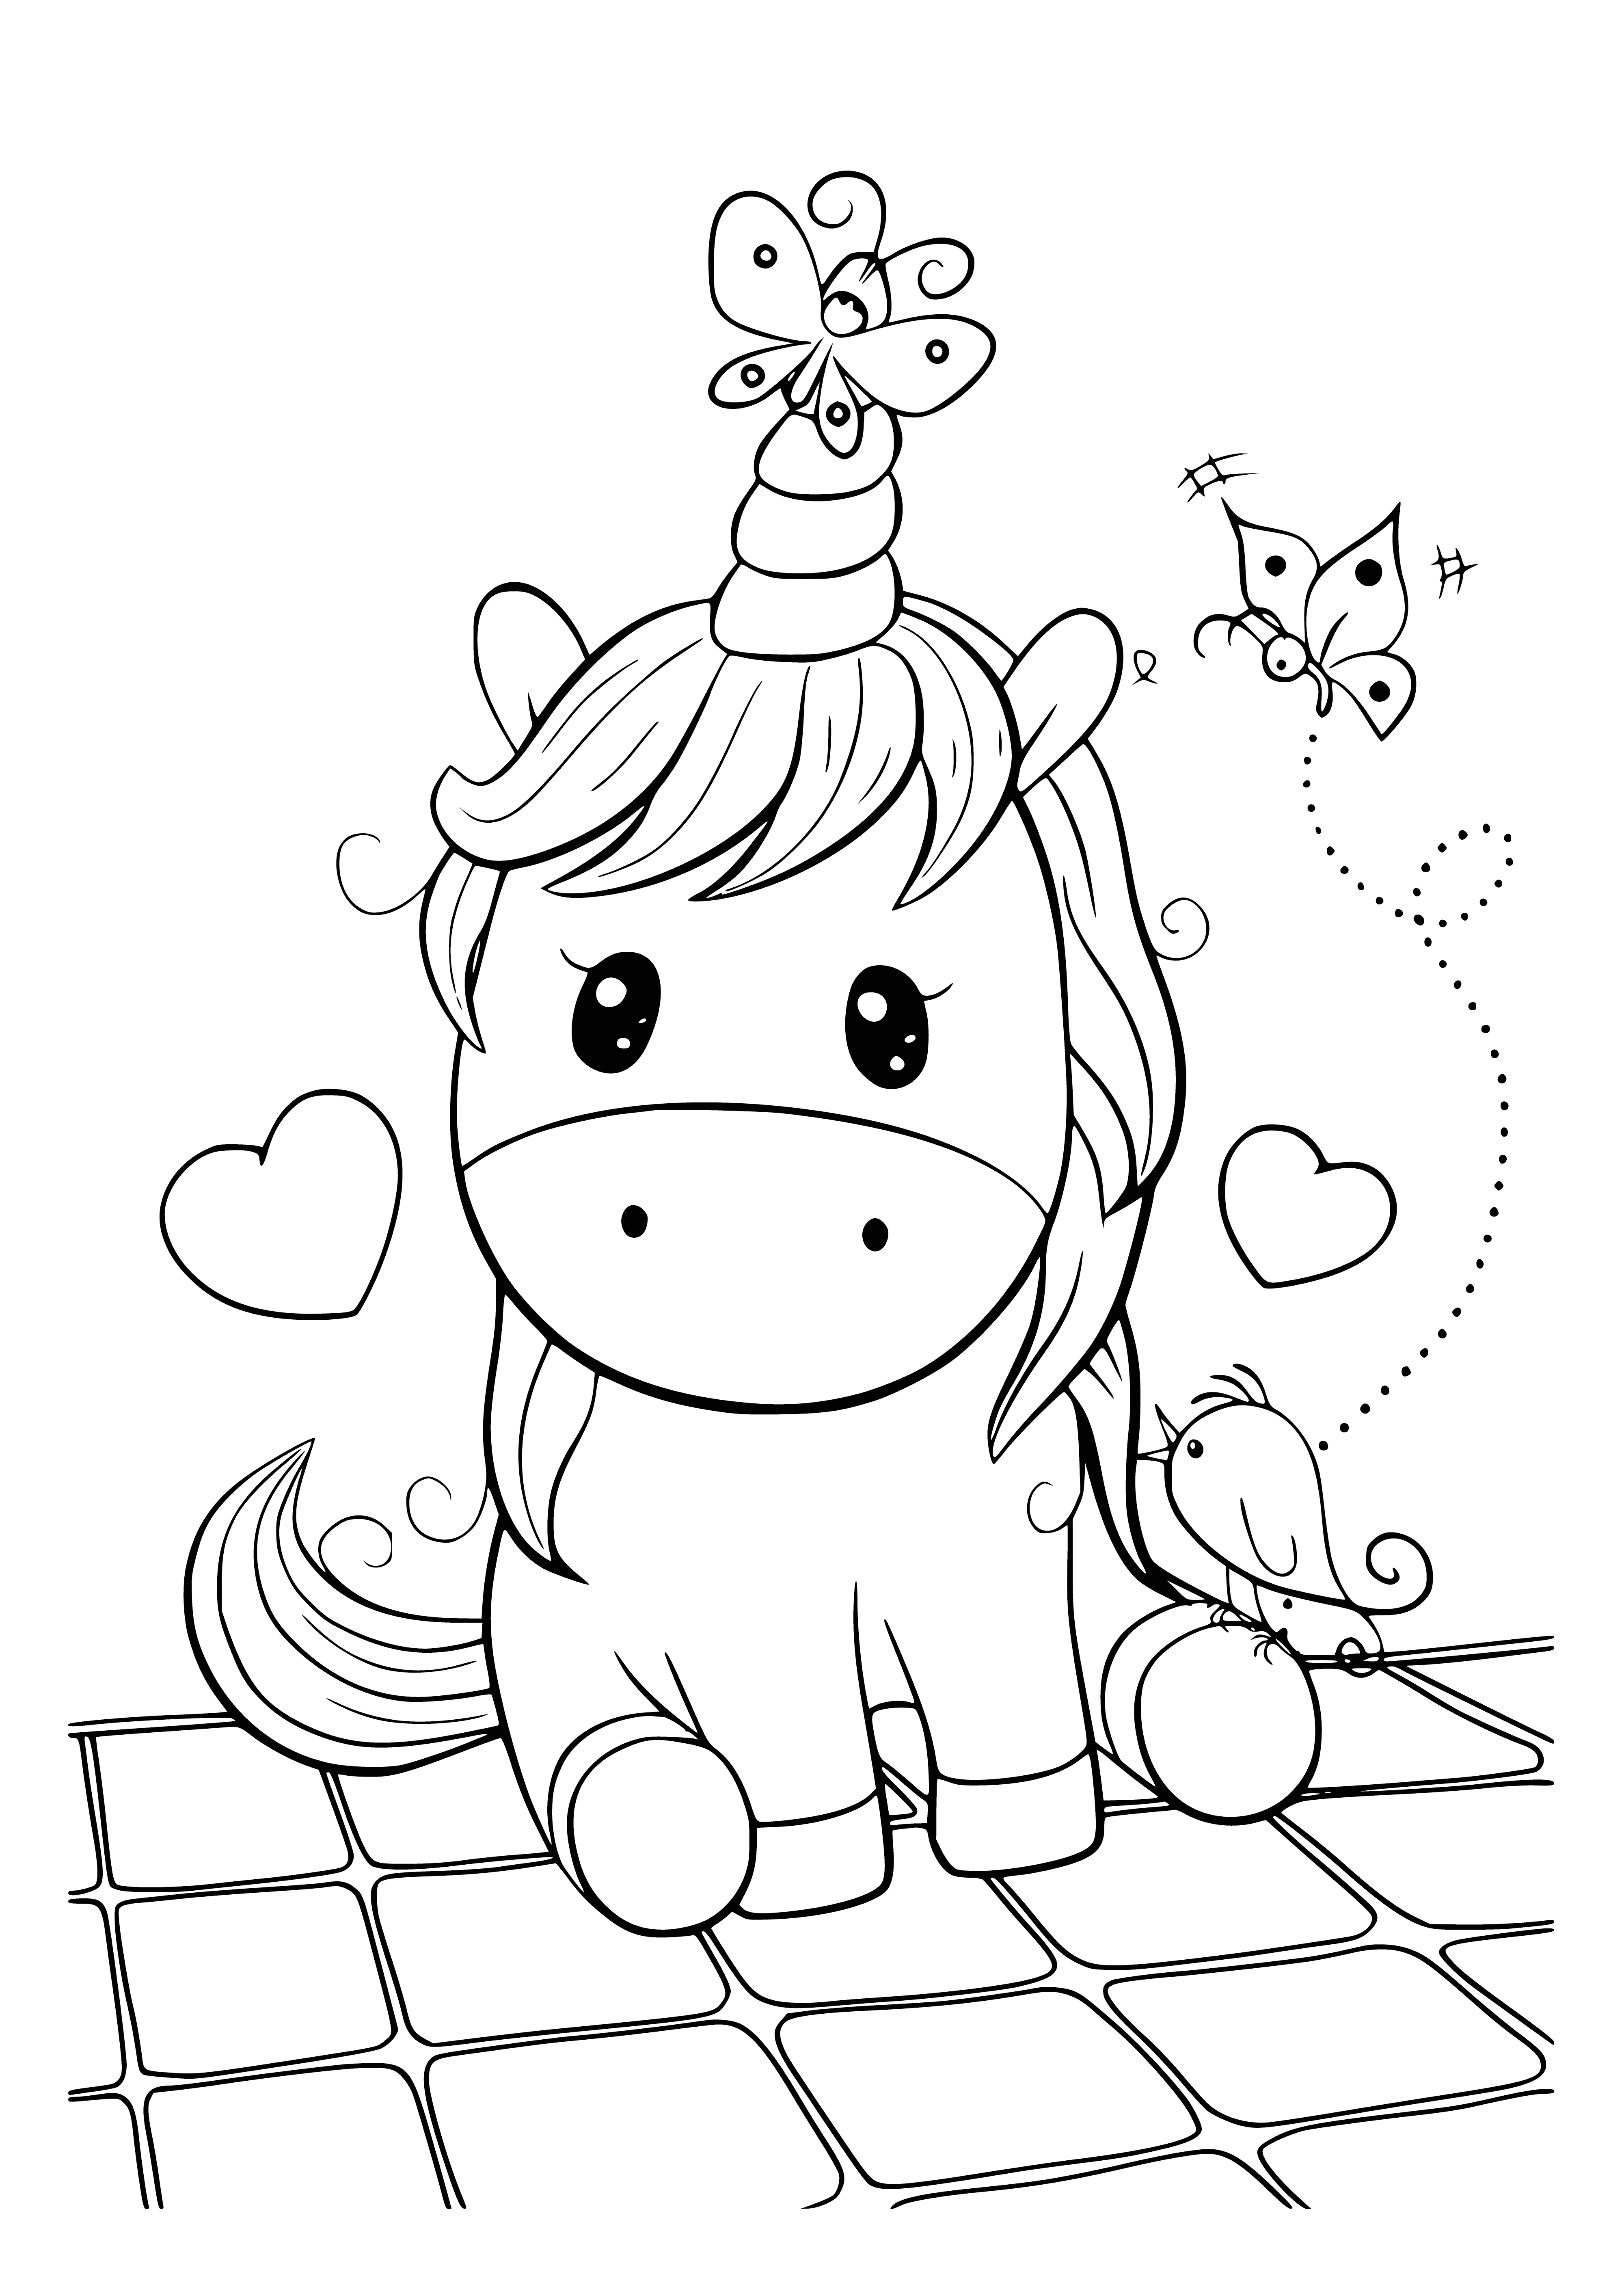 Little unicorn coloring page